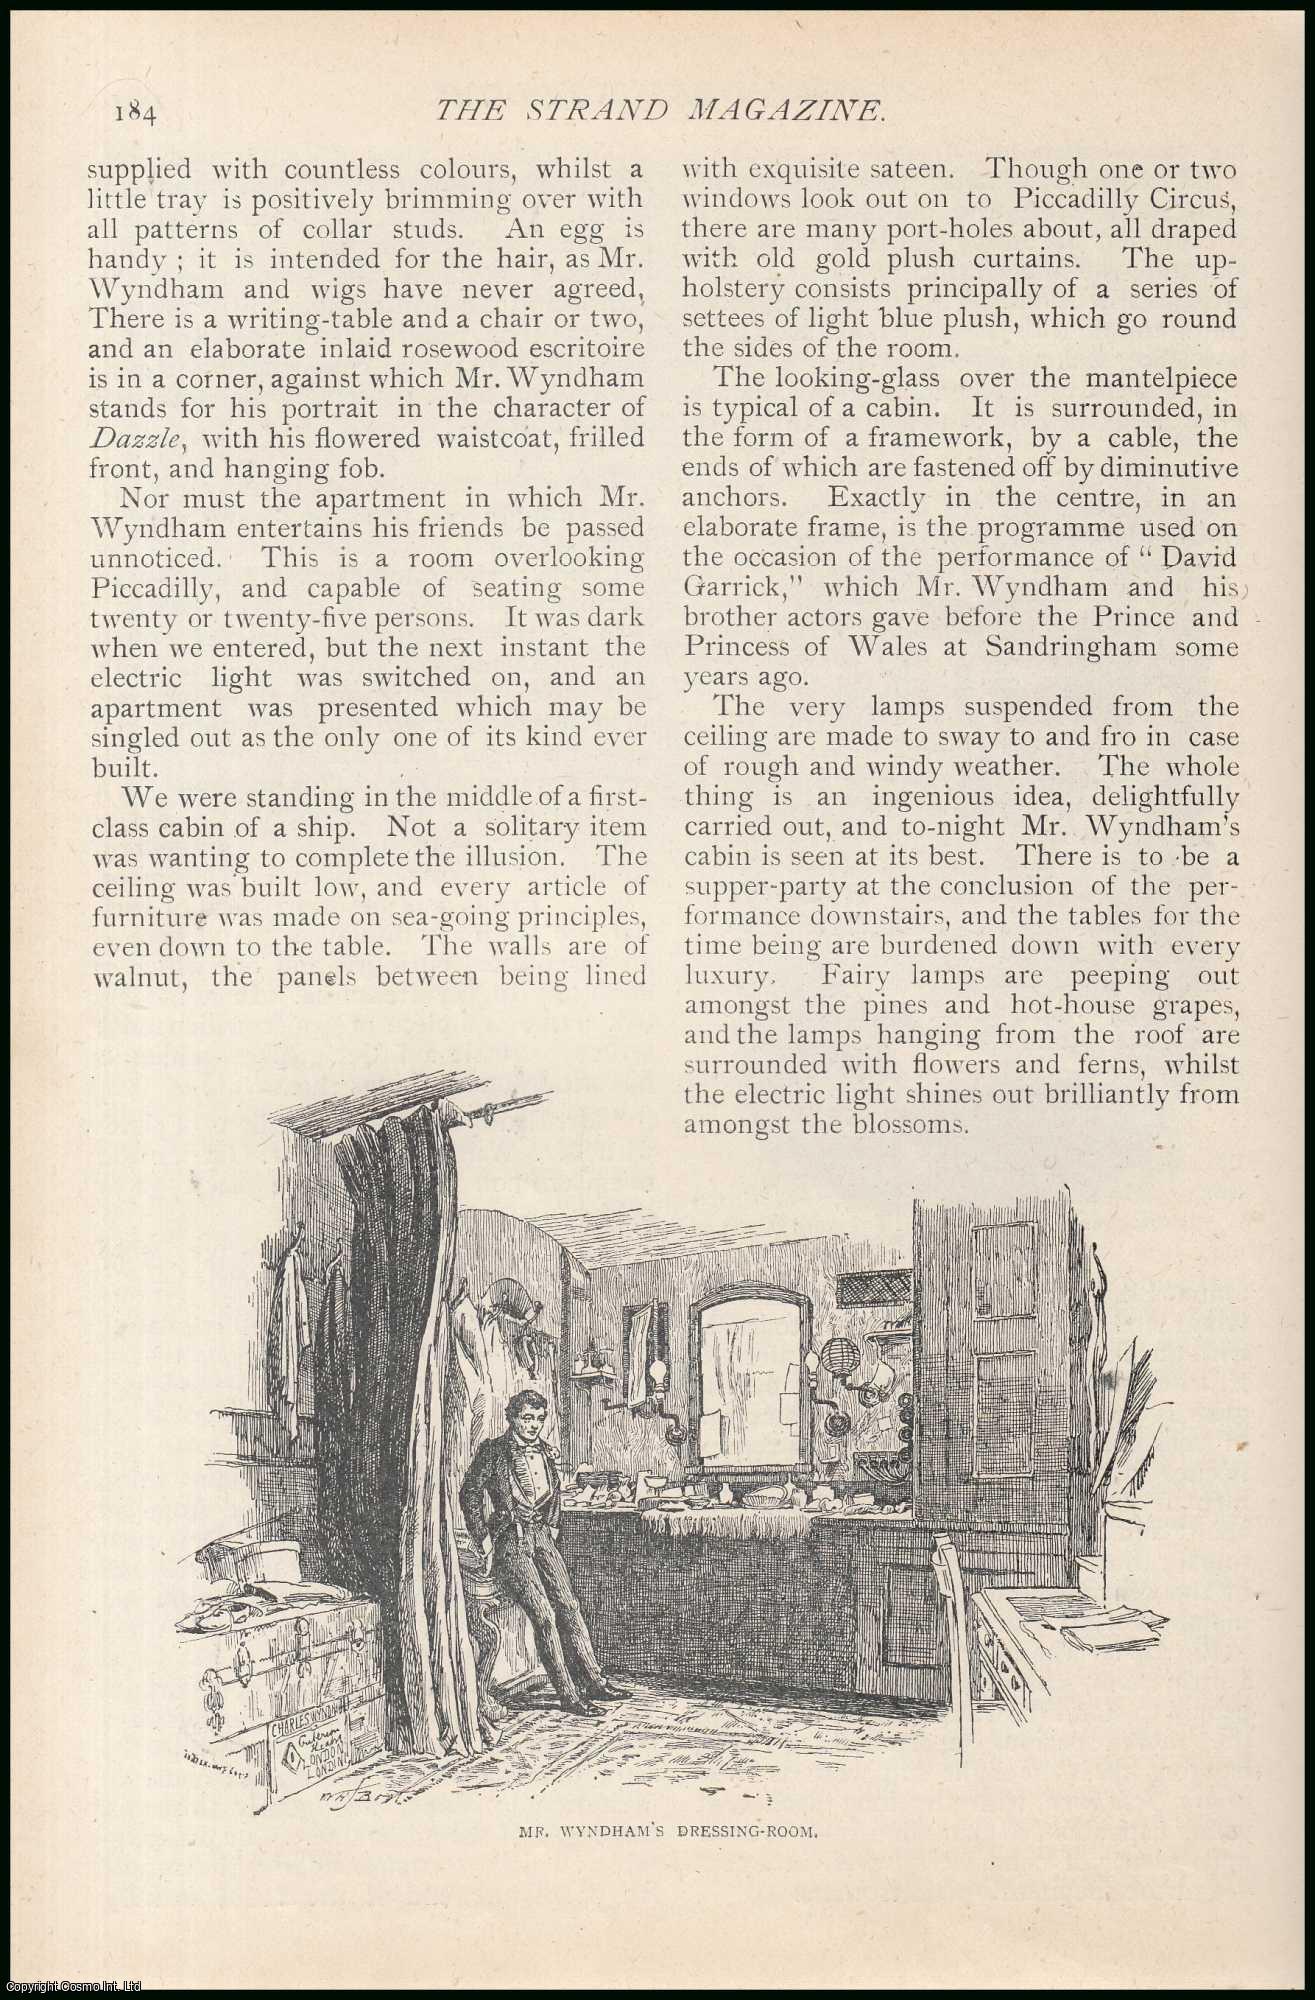 Strand Magazine - Mr. J.L. Toole ; Mr. W.S. Gilbert ; Henry Irving ; Charles Wyndham & others : Actors' Dressing Rooms. An uncommon original article from The Strand Magazine, 1891.